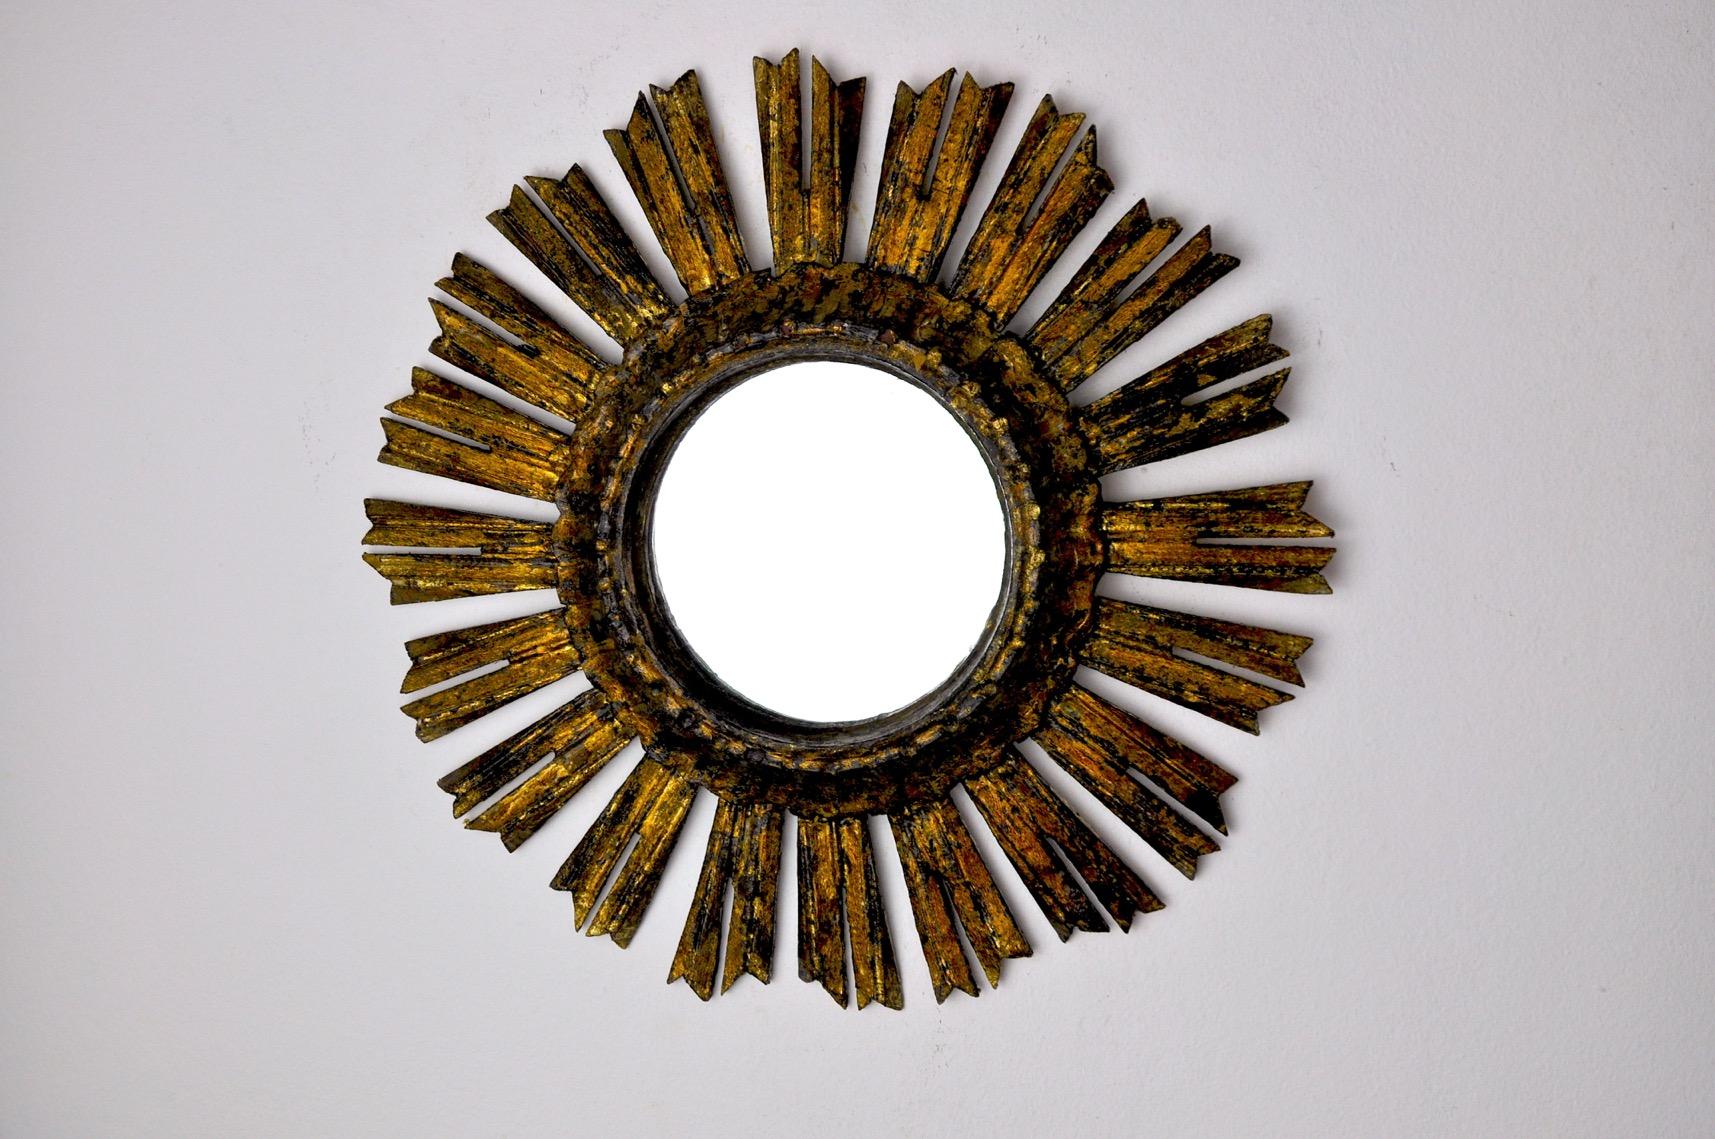 Very beautiful sun mirror in gilded wood dating from the beginning of the 20th century. Superb woodworking, gold leaf finish. Very nice patina, mirror in perfect condition. Unique objects that will decorate wonderfully and bring a real design touch